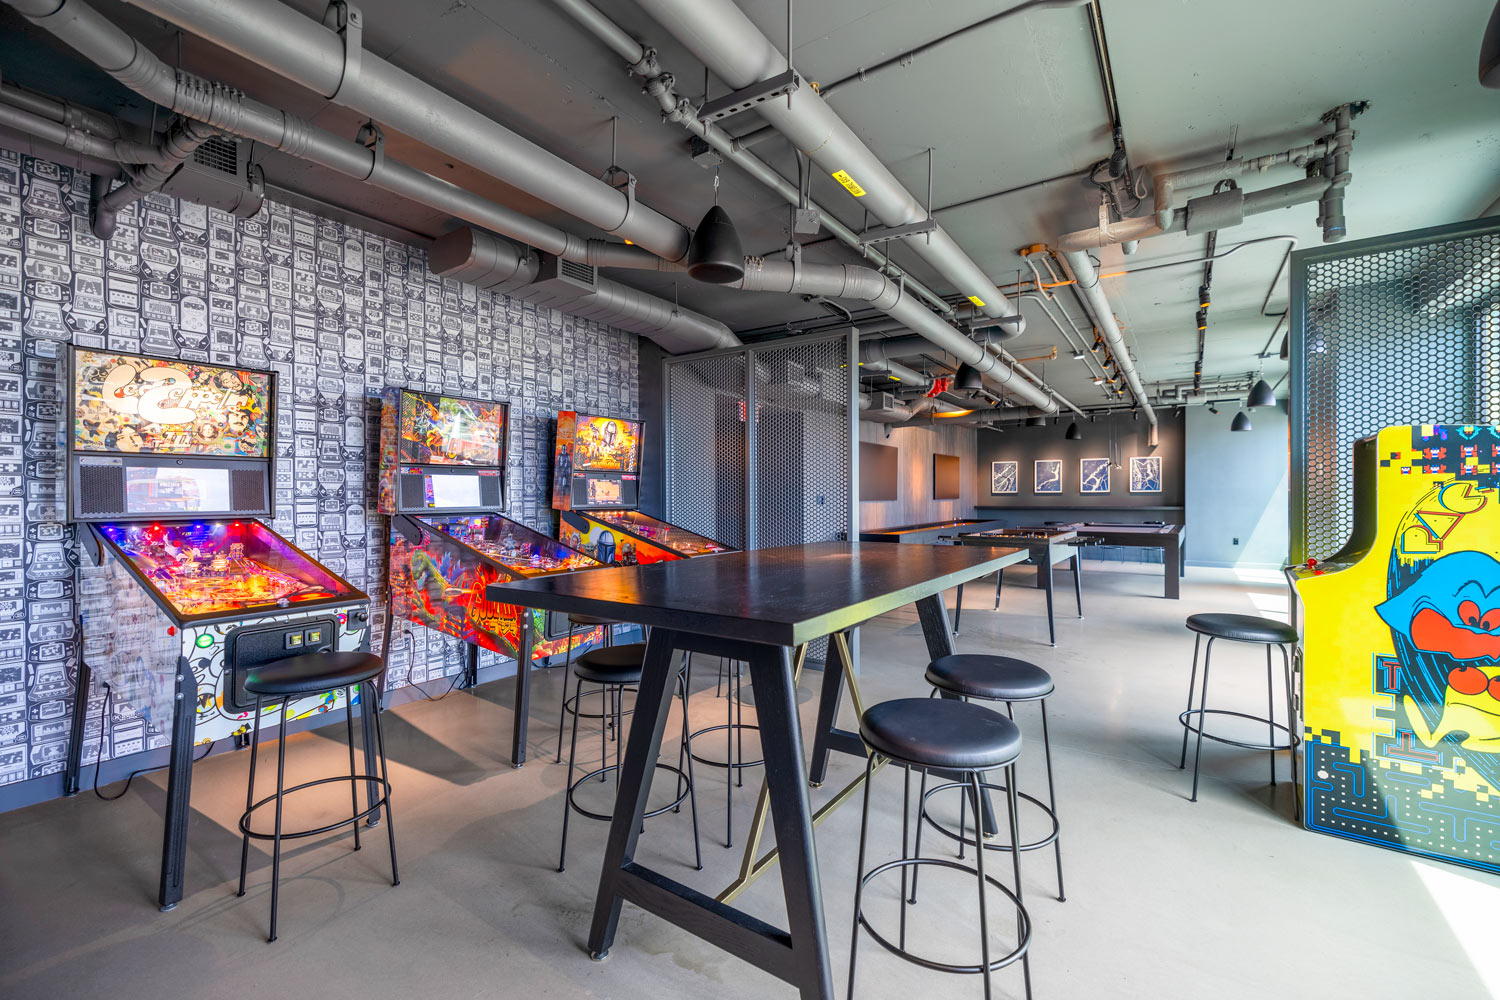 Game room - skip the distractions of home and get your head in the game